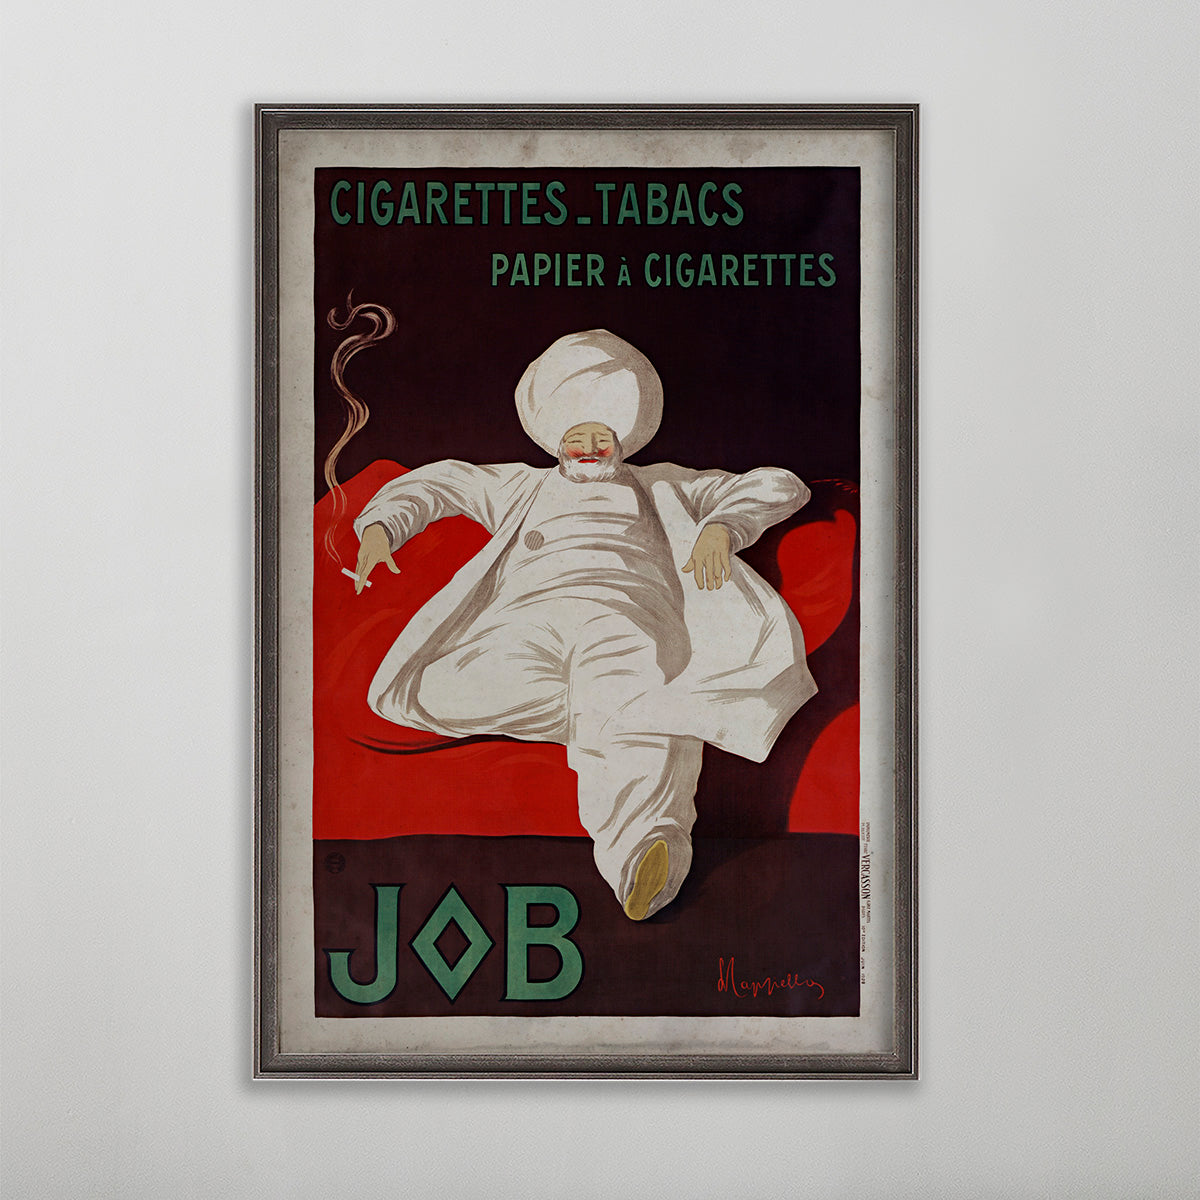 Job Cigarettes vintage poster wall art by leonetto cappiello. Man sitting on red couch with a turban smoking a cigarette. 